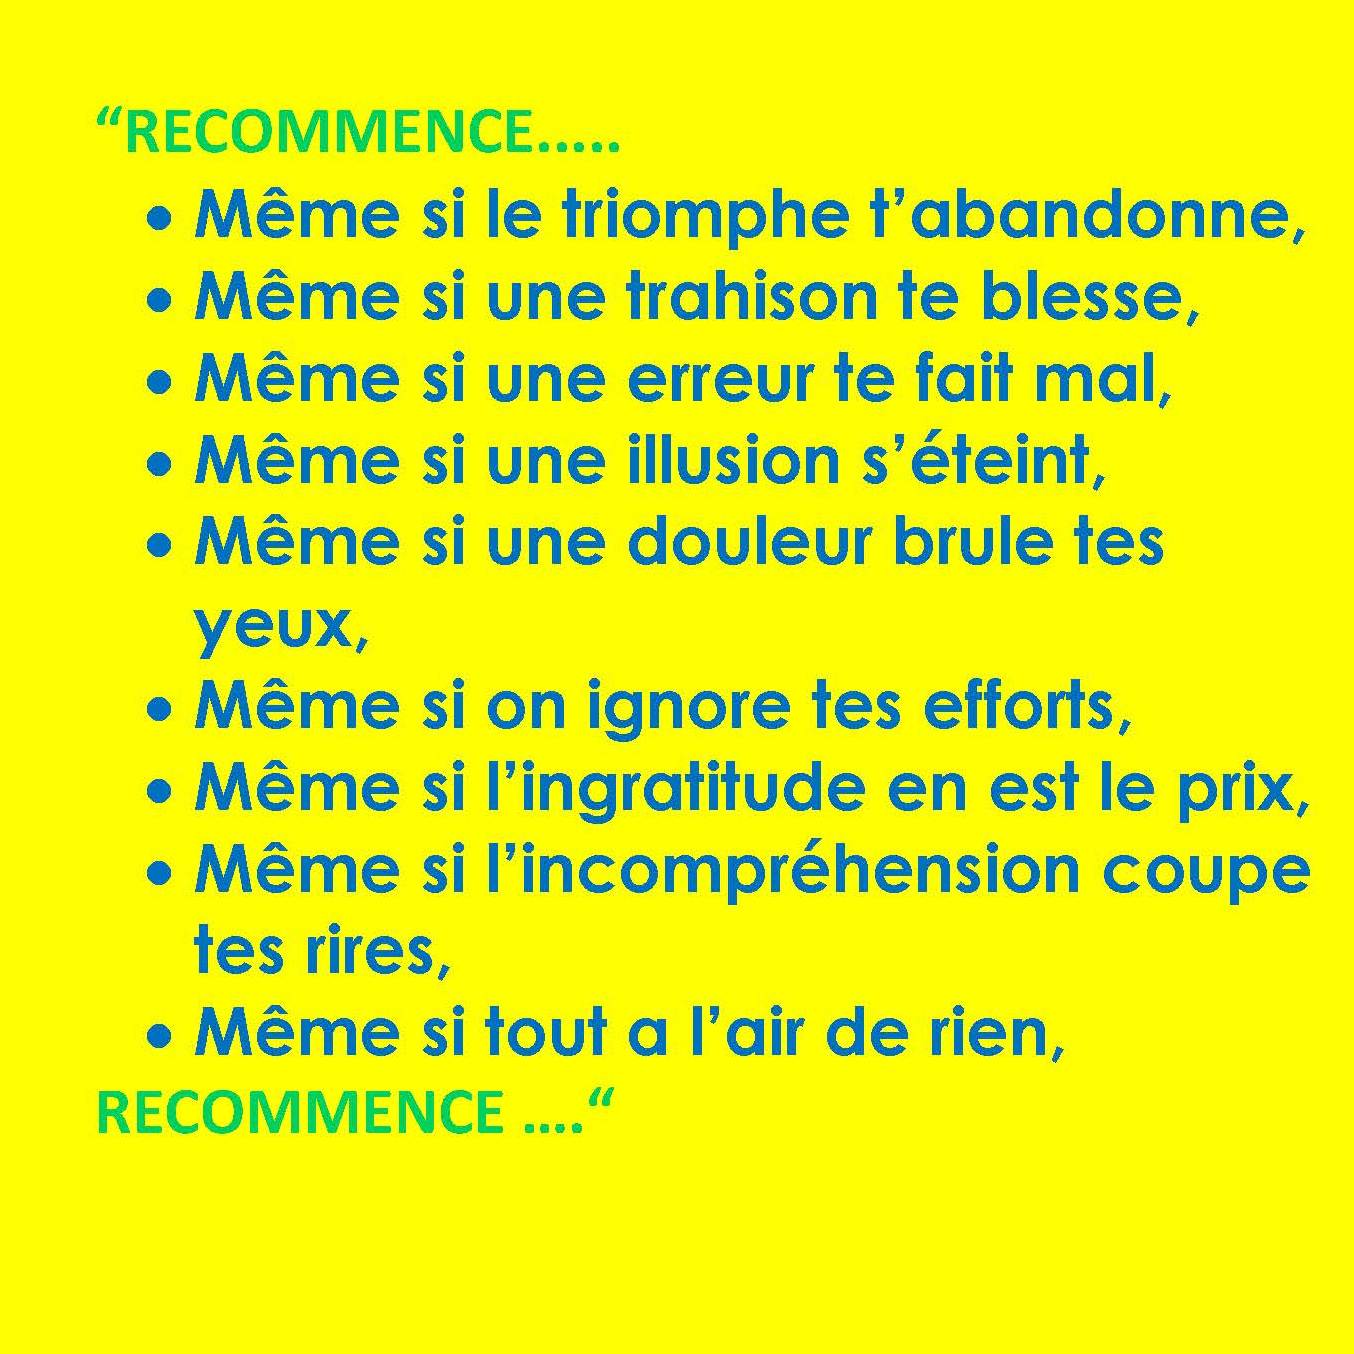 RECOMMENCE